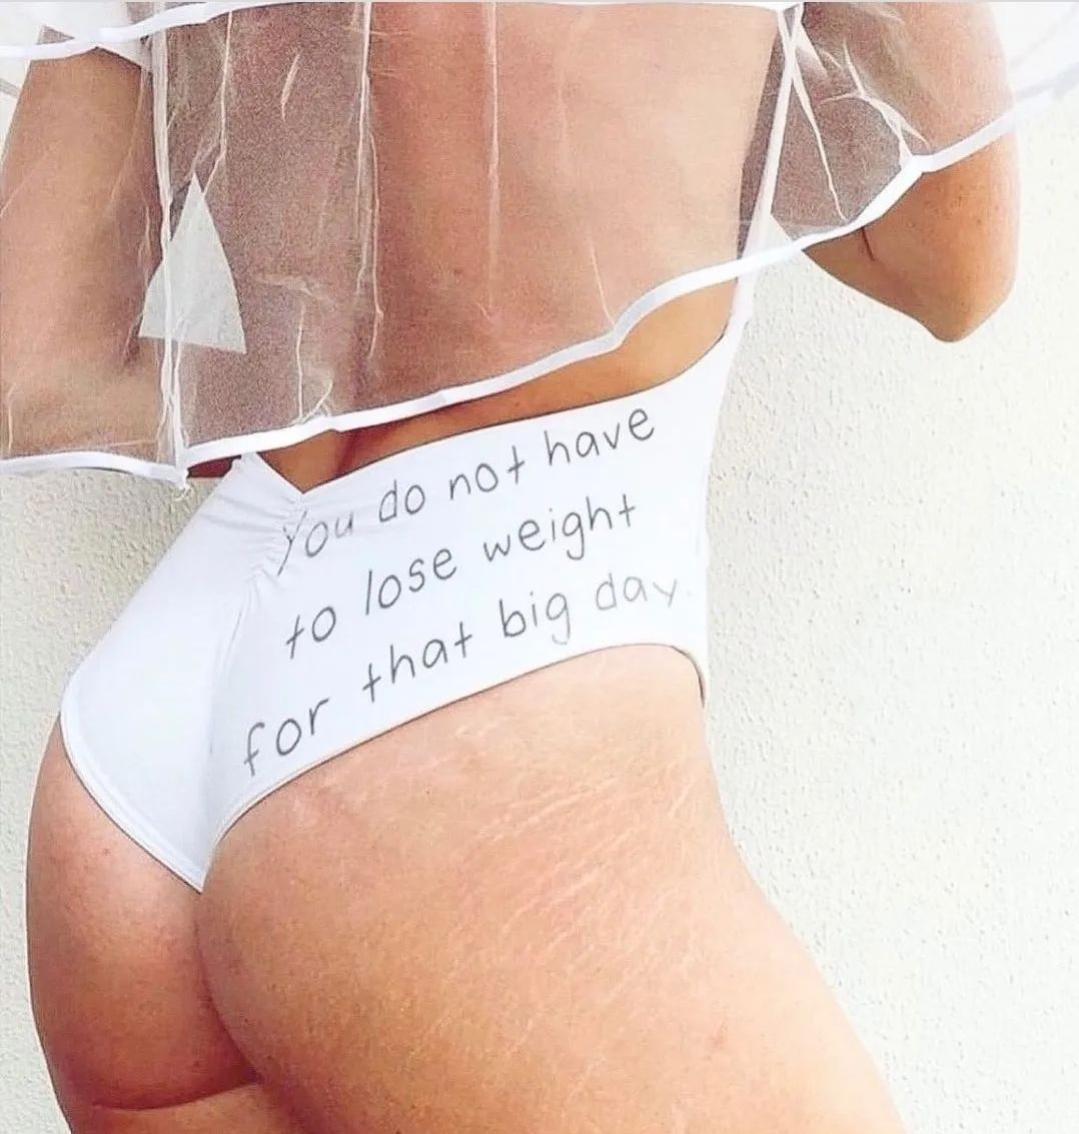 losing weight for your wedding day